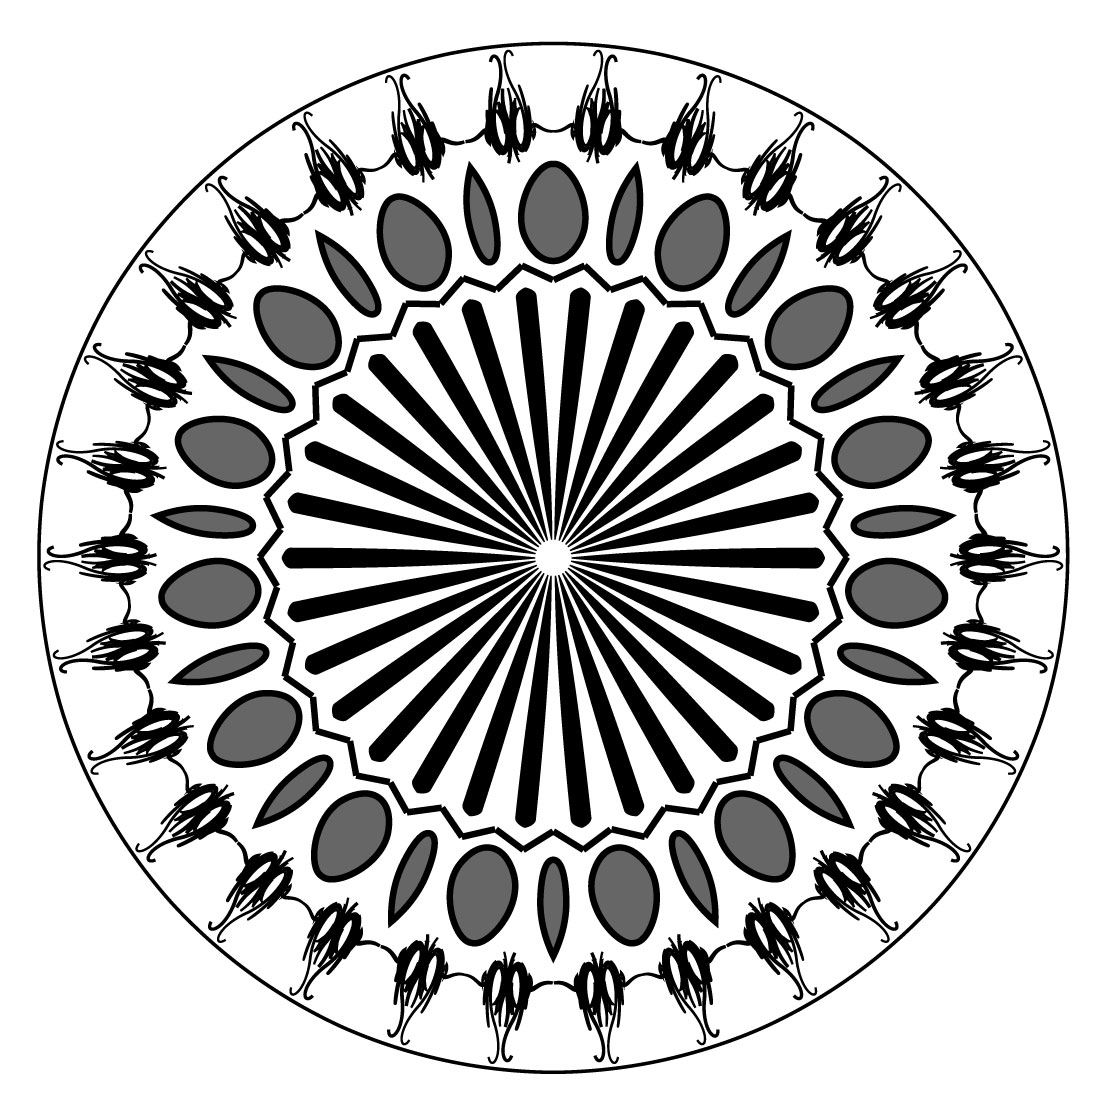 Mandala-Art-with-black-spiral-in-white-background cover image.